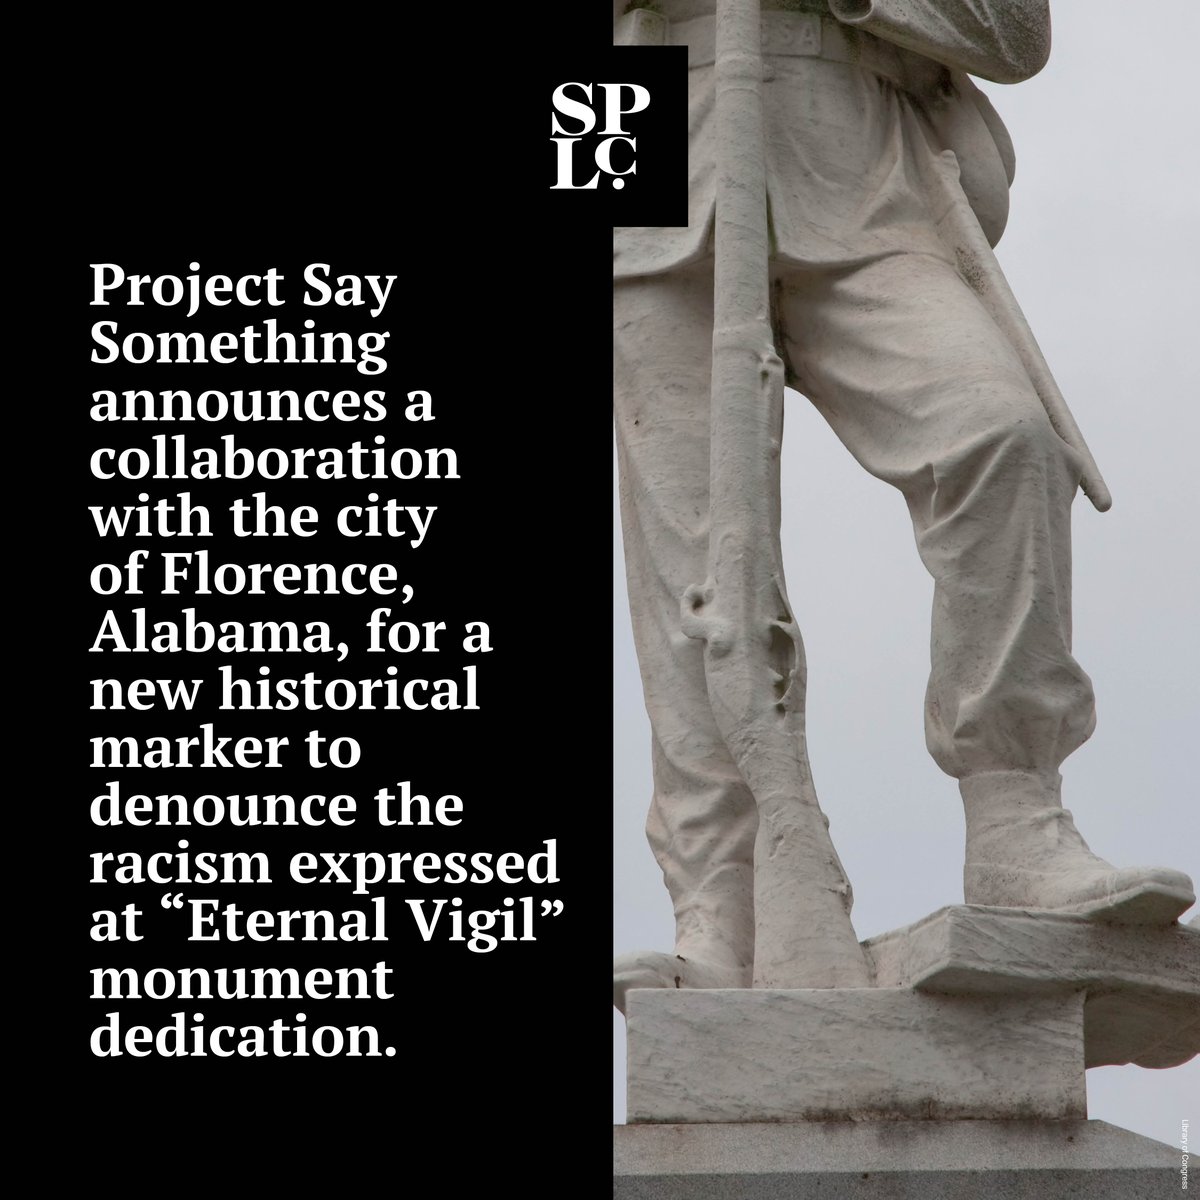 Today, @staywokesouth announced a collaboration with Florence, Alabama, for a historical marker denouncing racism expressed at the 'Eternal Vigil' Confederate monument dedication. bit.ly/4aQ9gyo #WhoseHeritage #RefuseHate